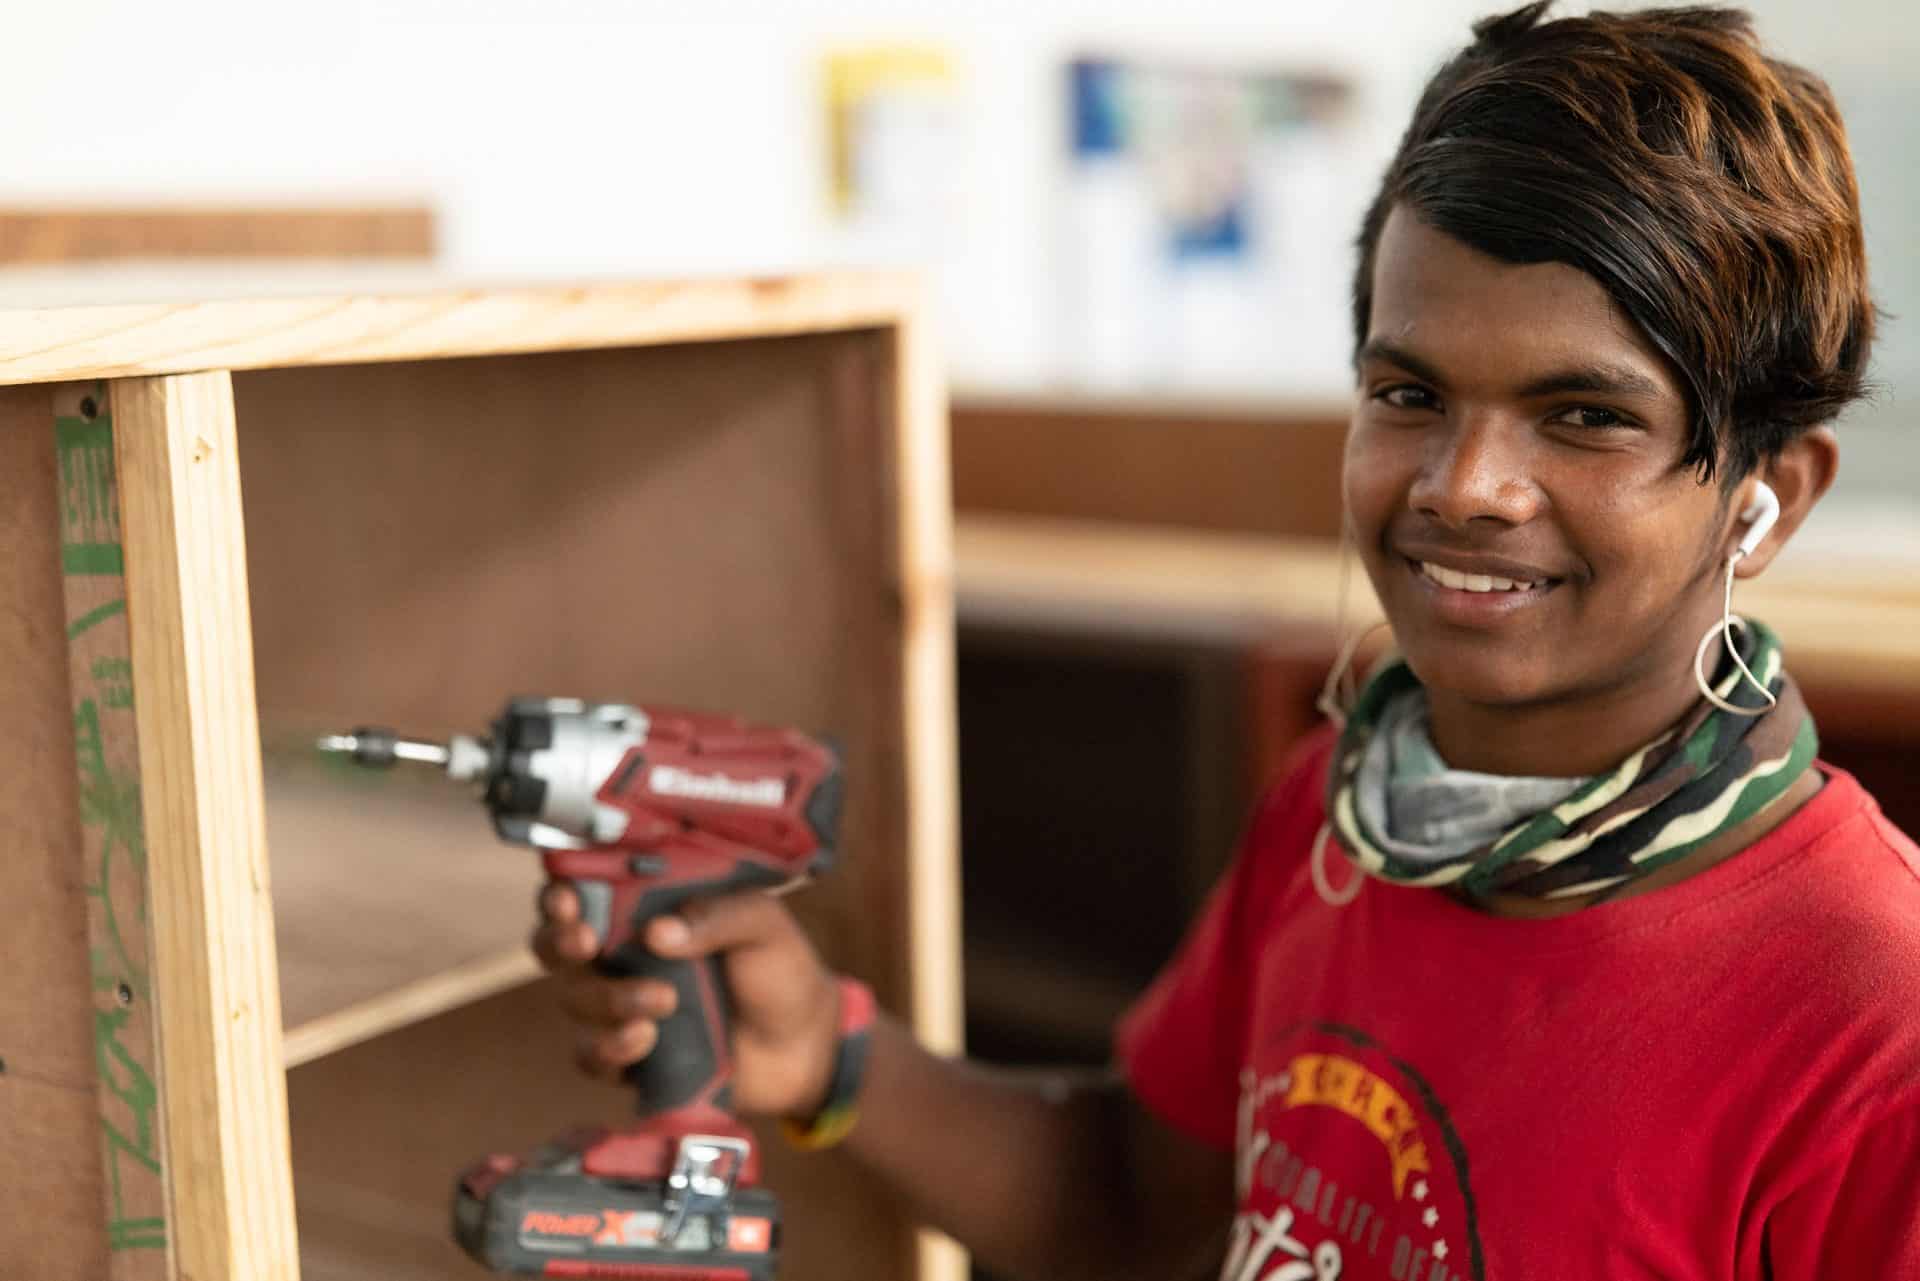 Boy from Himalayan Life Vocation Training Program in Nepal holds up a screwdriver as he learns how to put together a bookcase